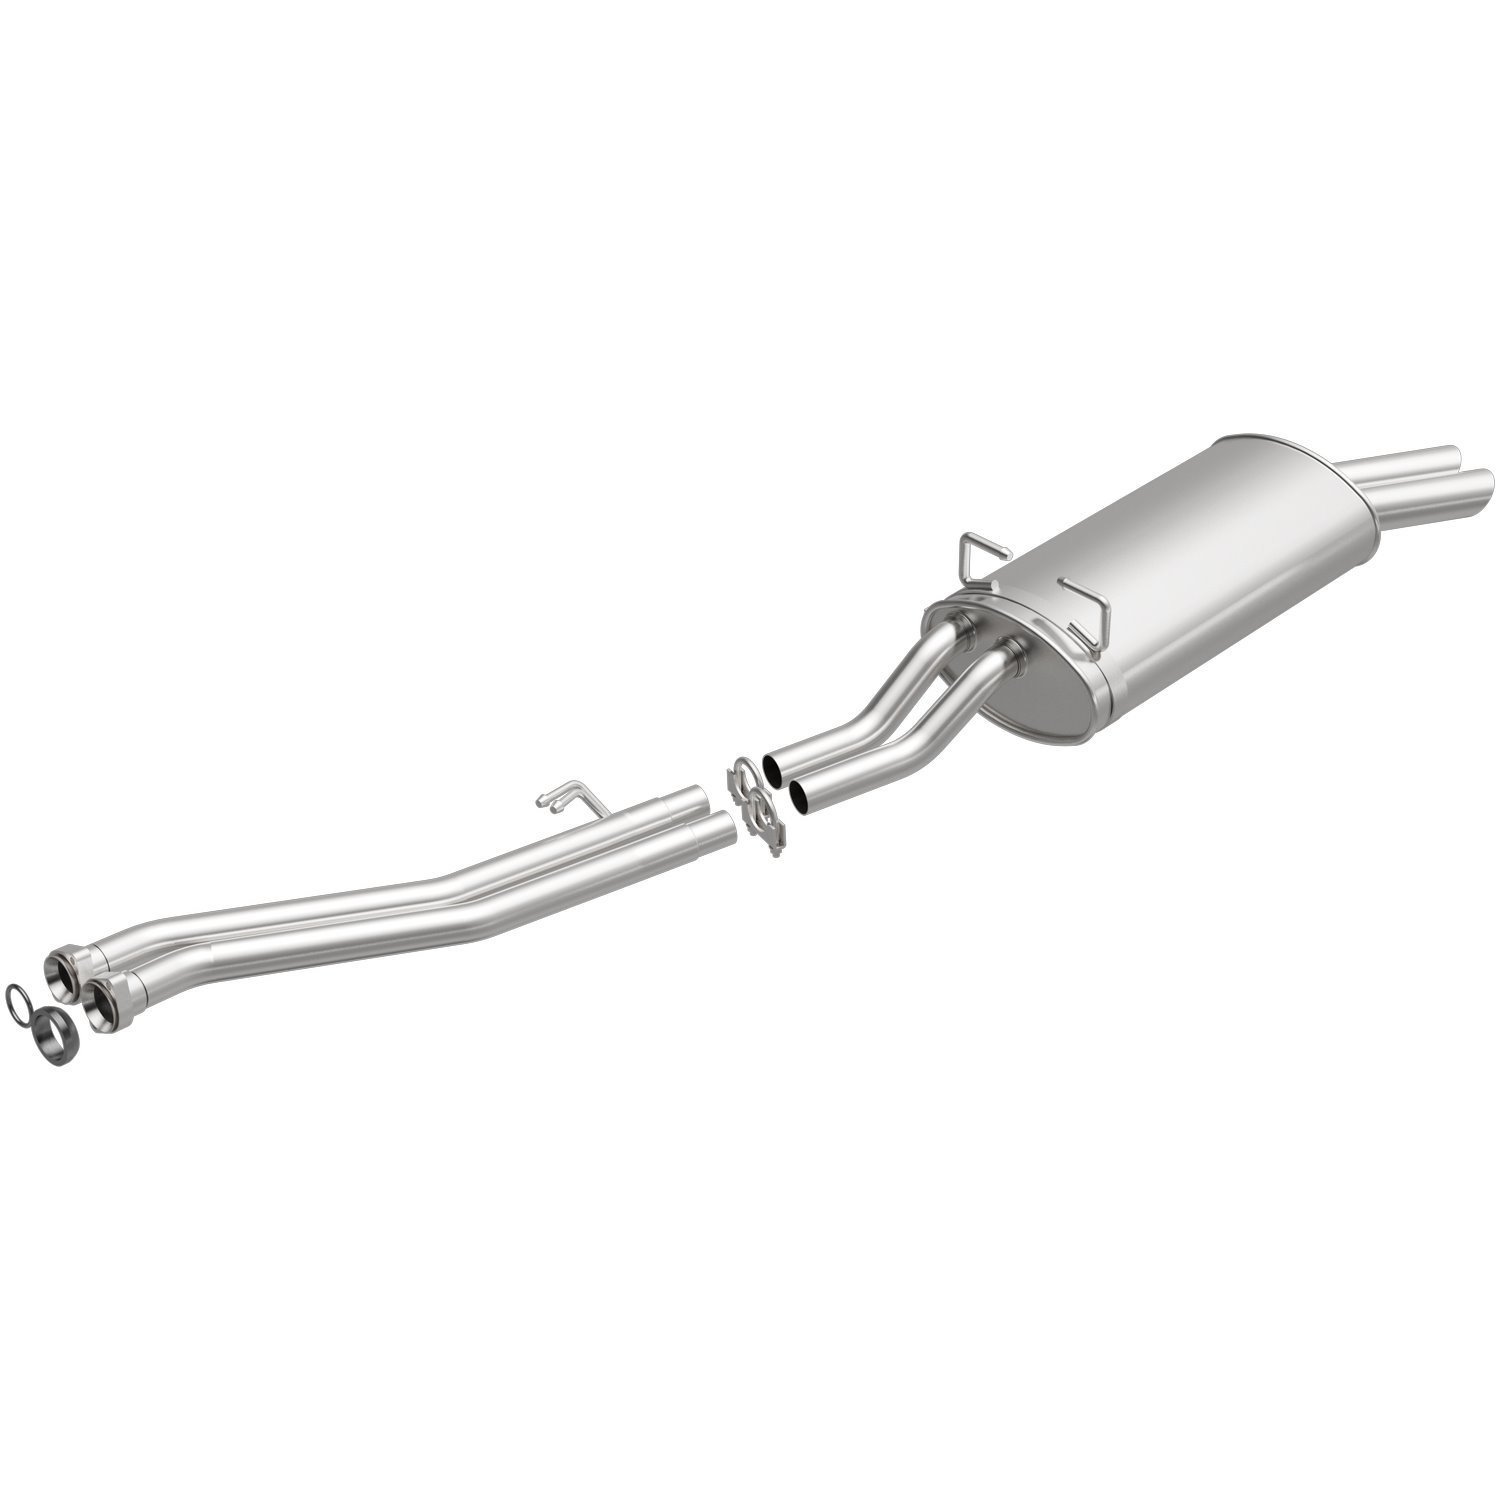 Direct-Fit Exhaust Kit, 1987-1993 BMW 325i/325is 2.5L